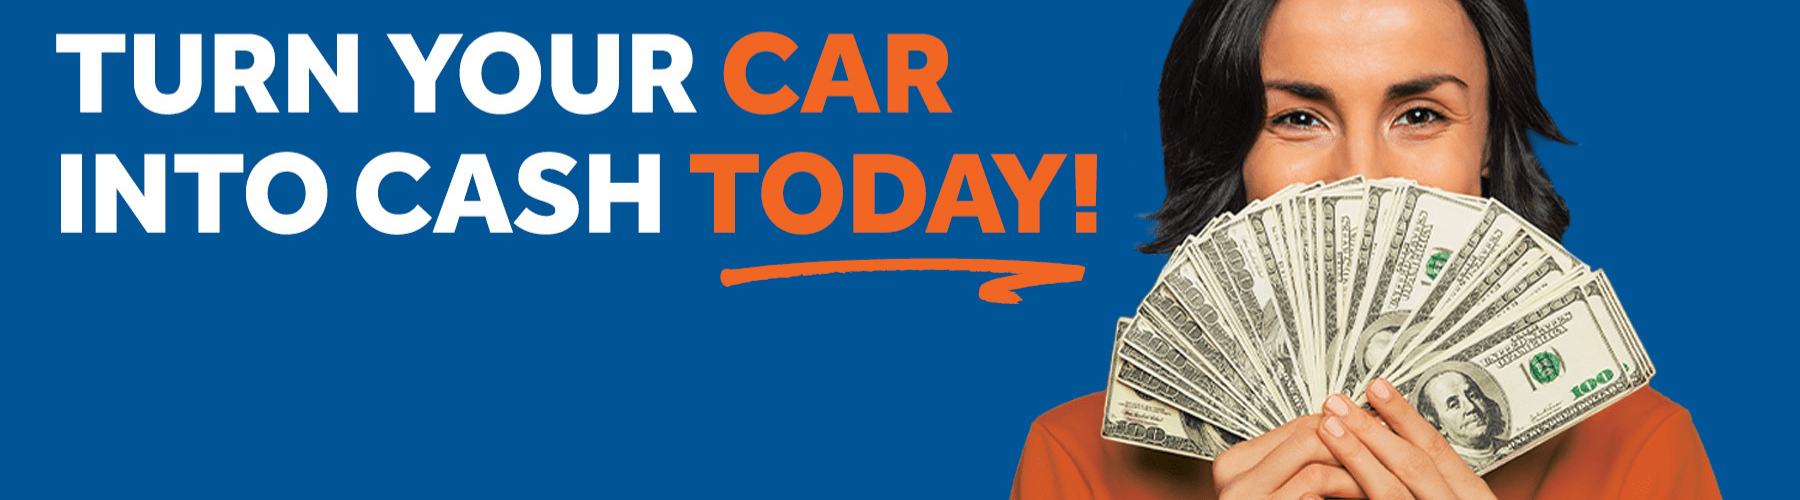 Turn Your Car Into Cash Today